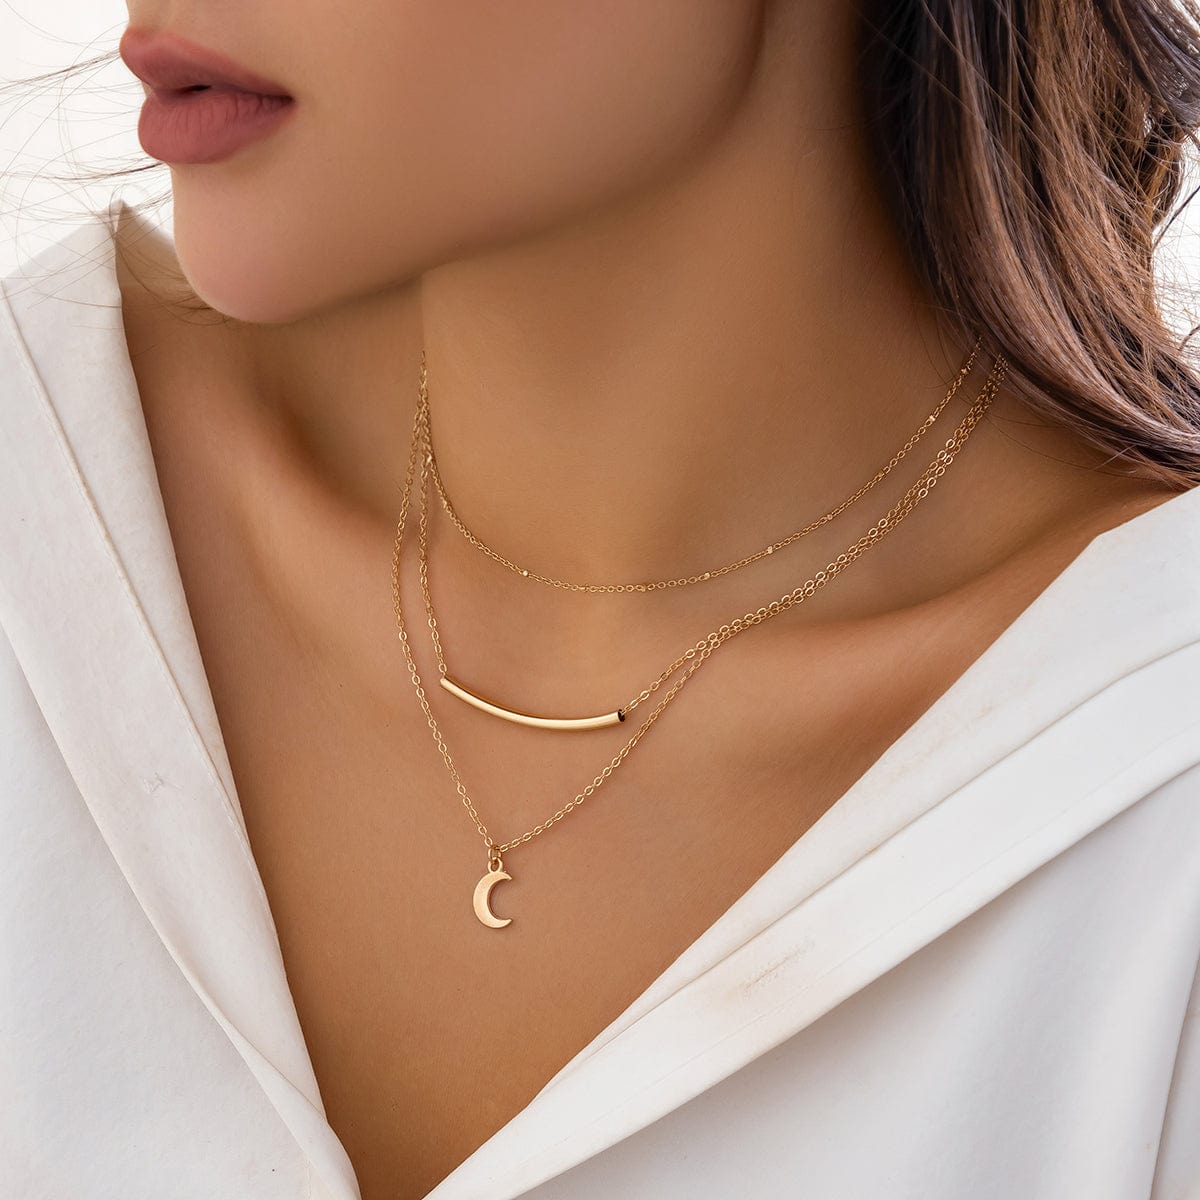 Trendy Layered Curved Bar Moon Pendant Cable Chain Necklace Set - ArtGalleryZen